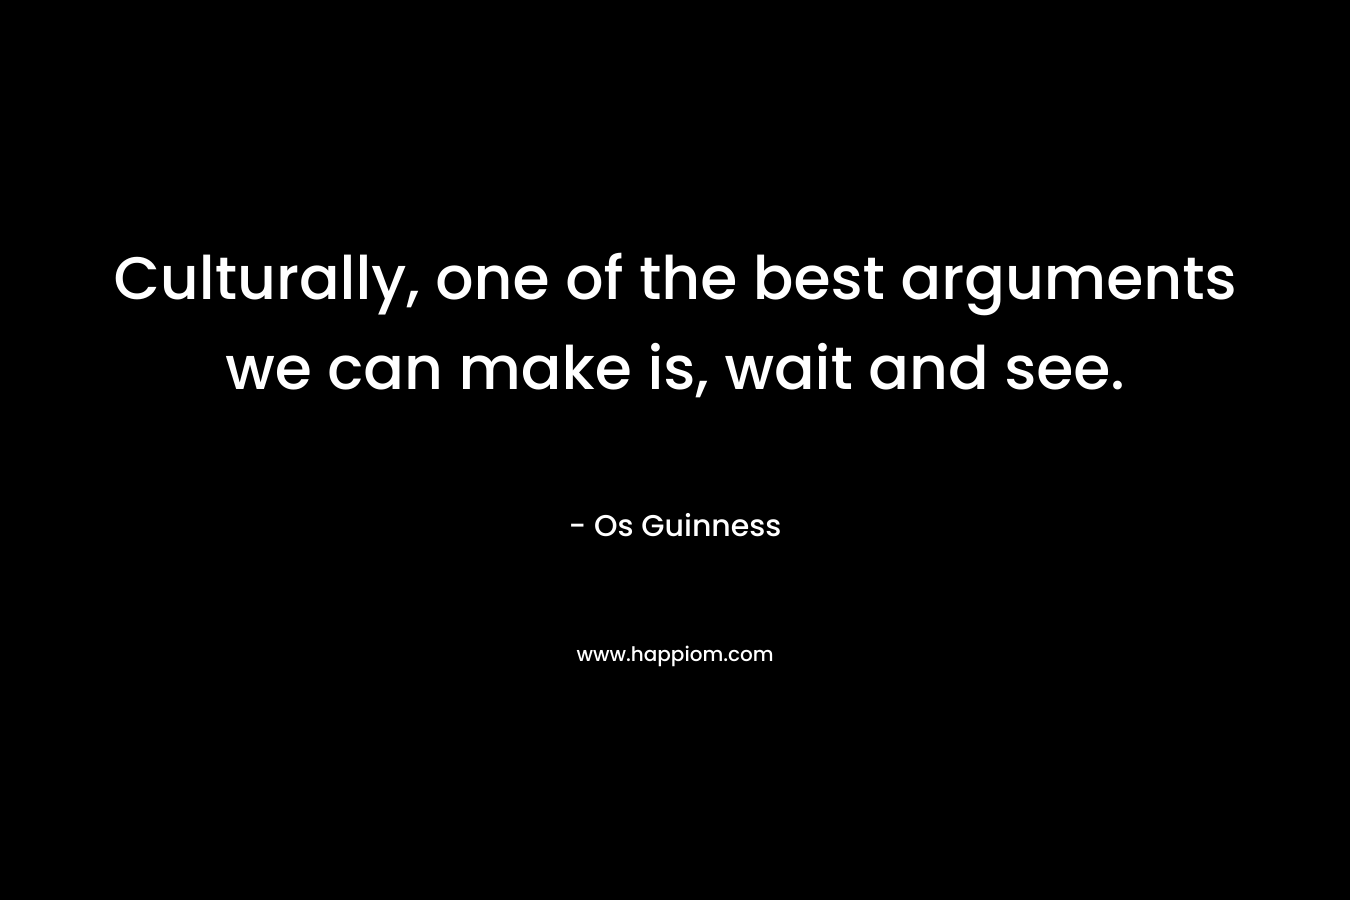 Culturally, one of the best arguments we can make is, wait and see. – Os Guinness